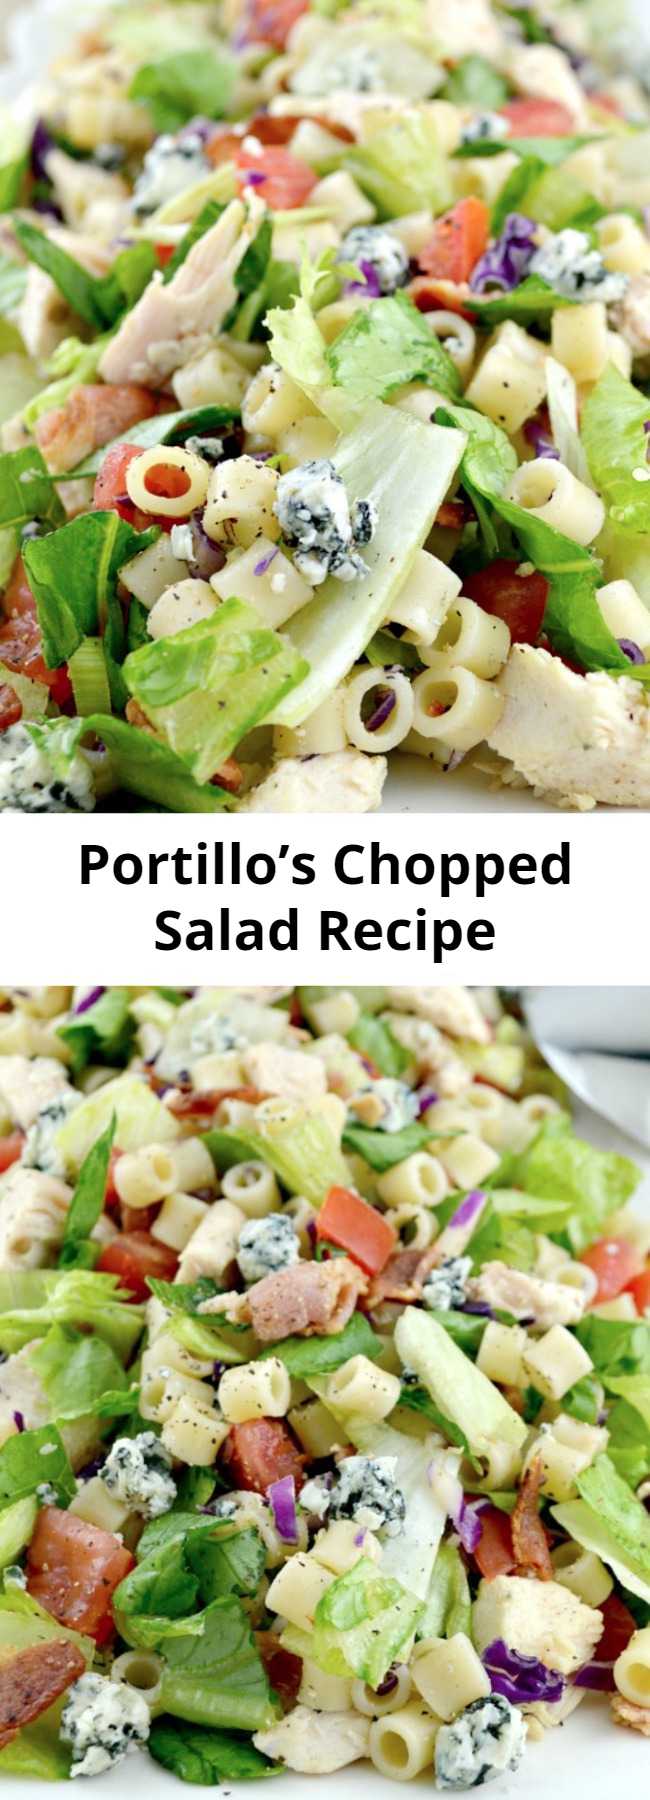 Portillo’s Chopped Salad Recipe - Portillo's Chopped Salad is a copycat recipe like the restaurant version. Loaded with great chicken, pasta, bacon, and blue cheese then dressed in a sweet Italian dressing!